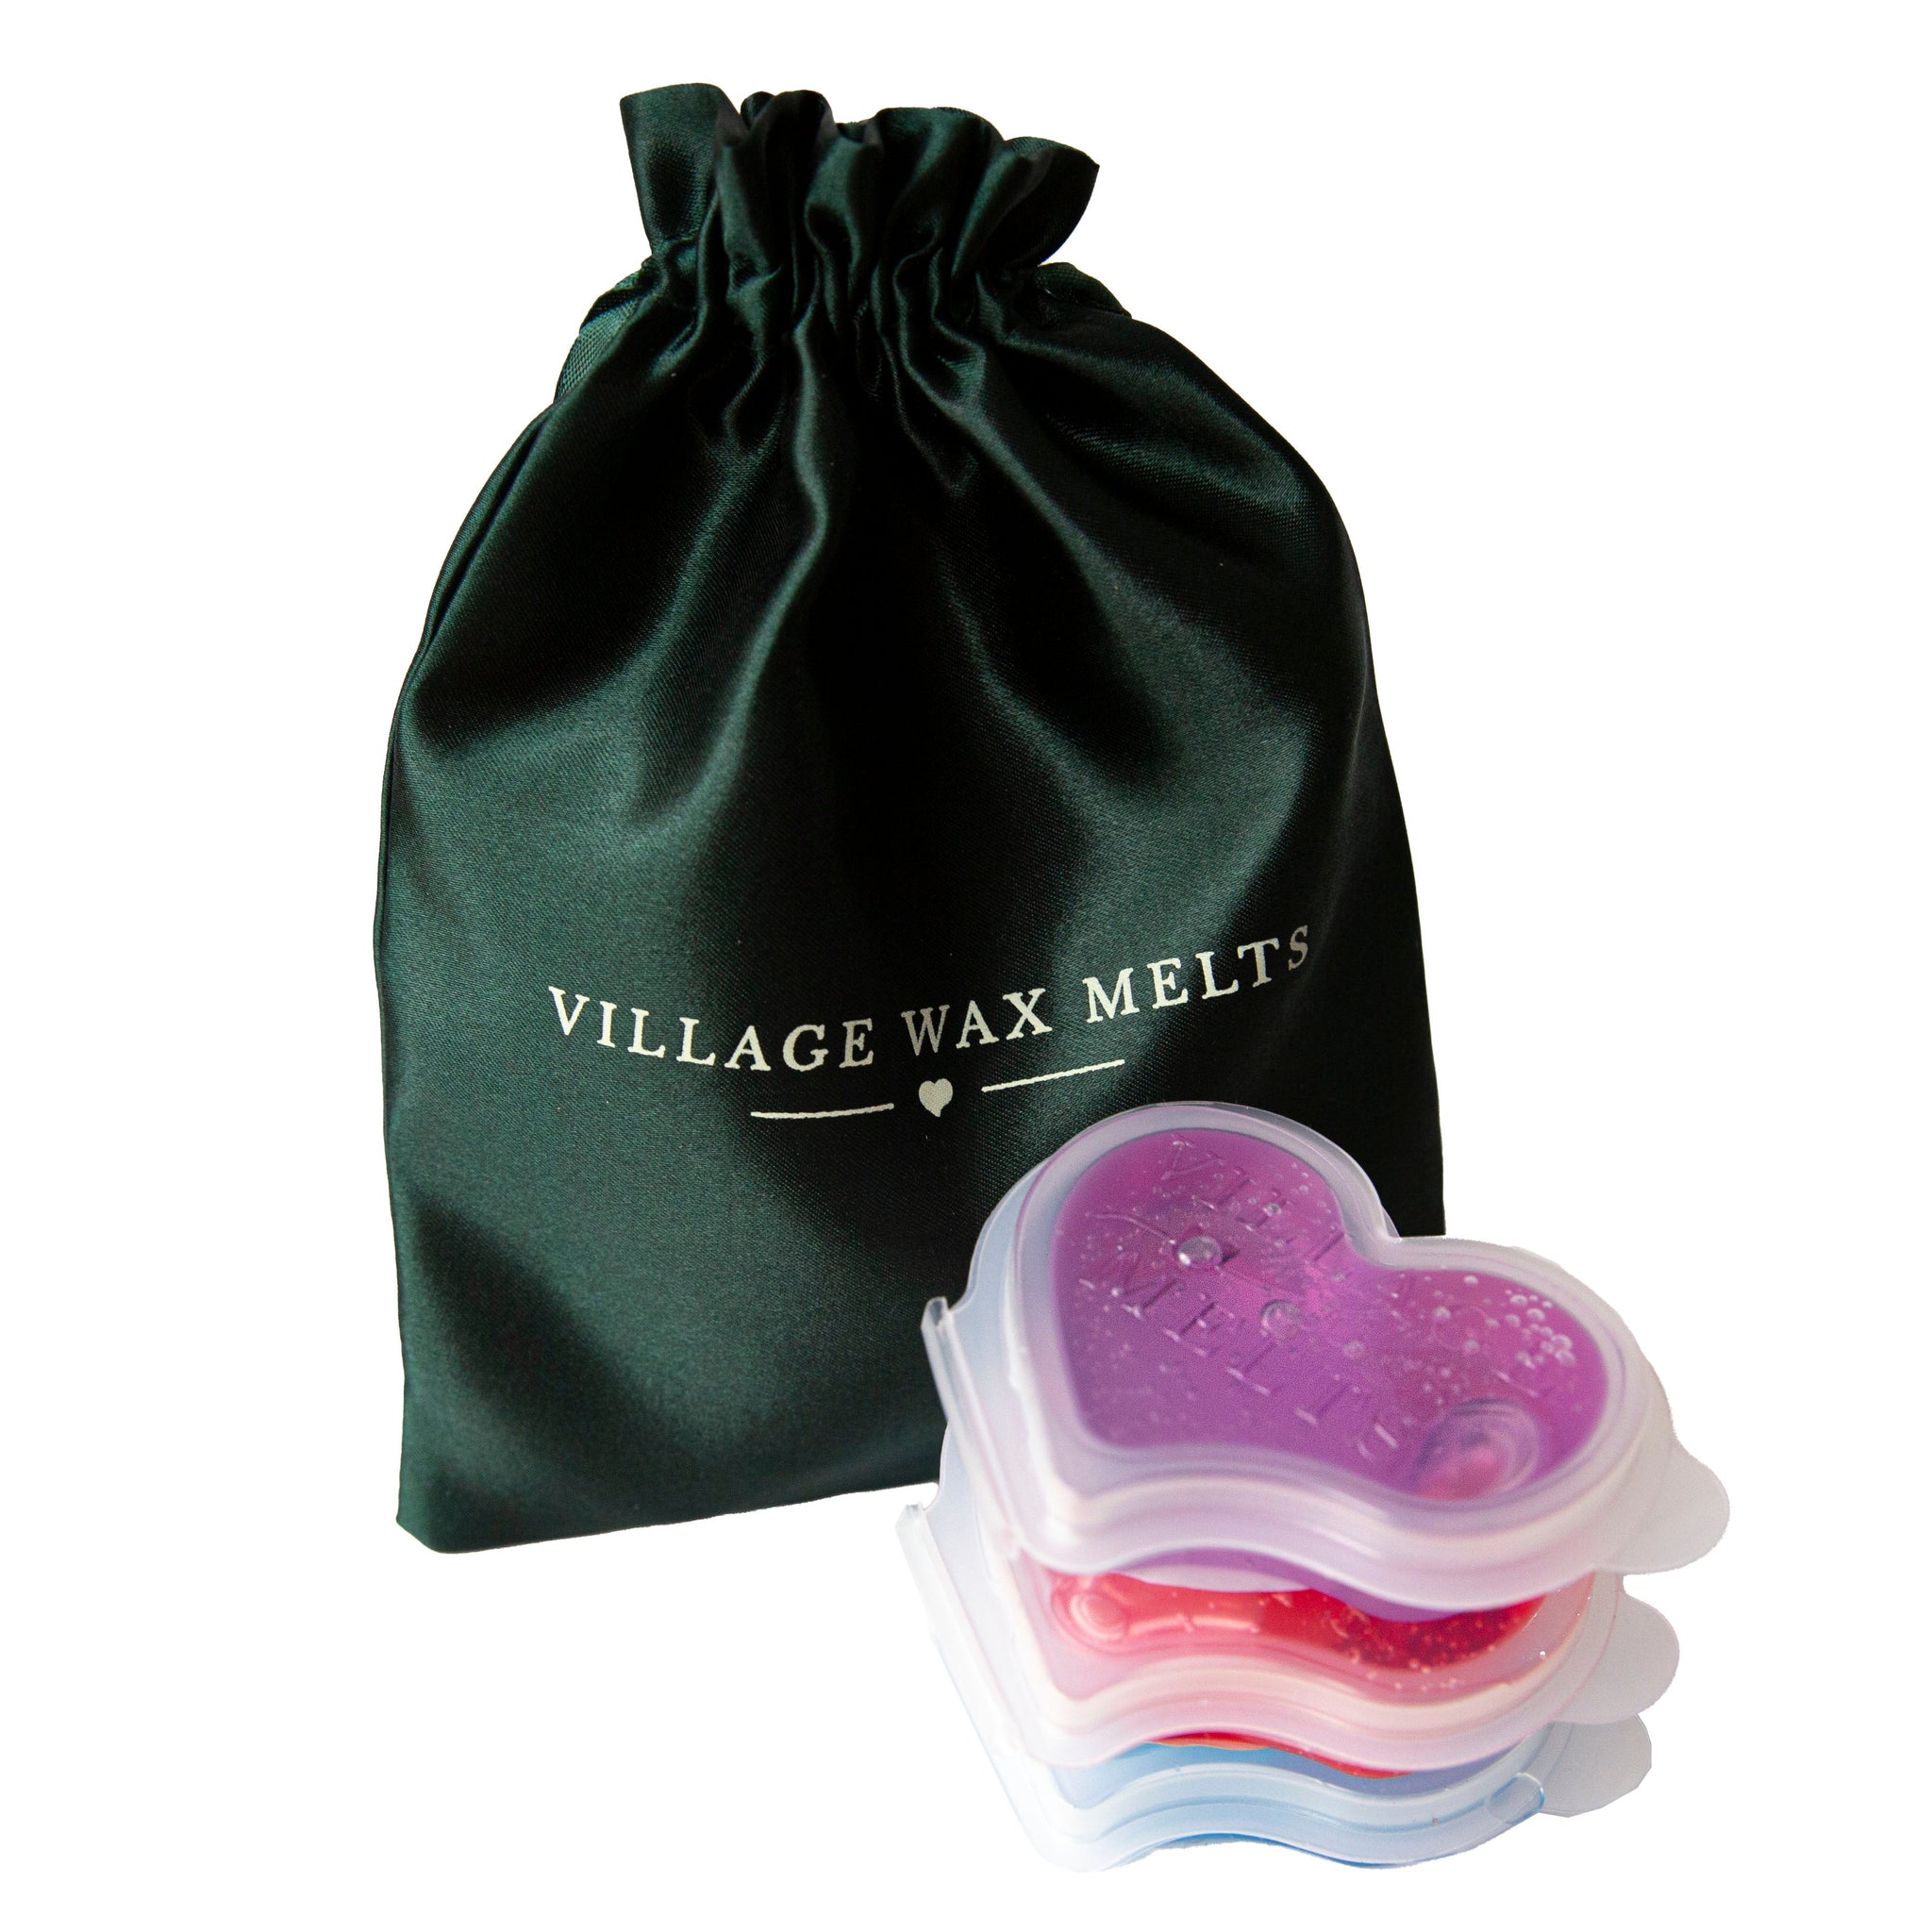 The Ultimate Guide To Gel Wax Melts ✨ - Village Wax Melts